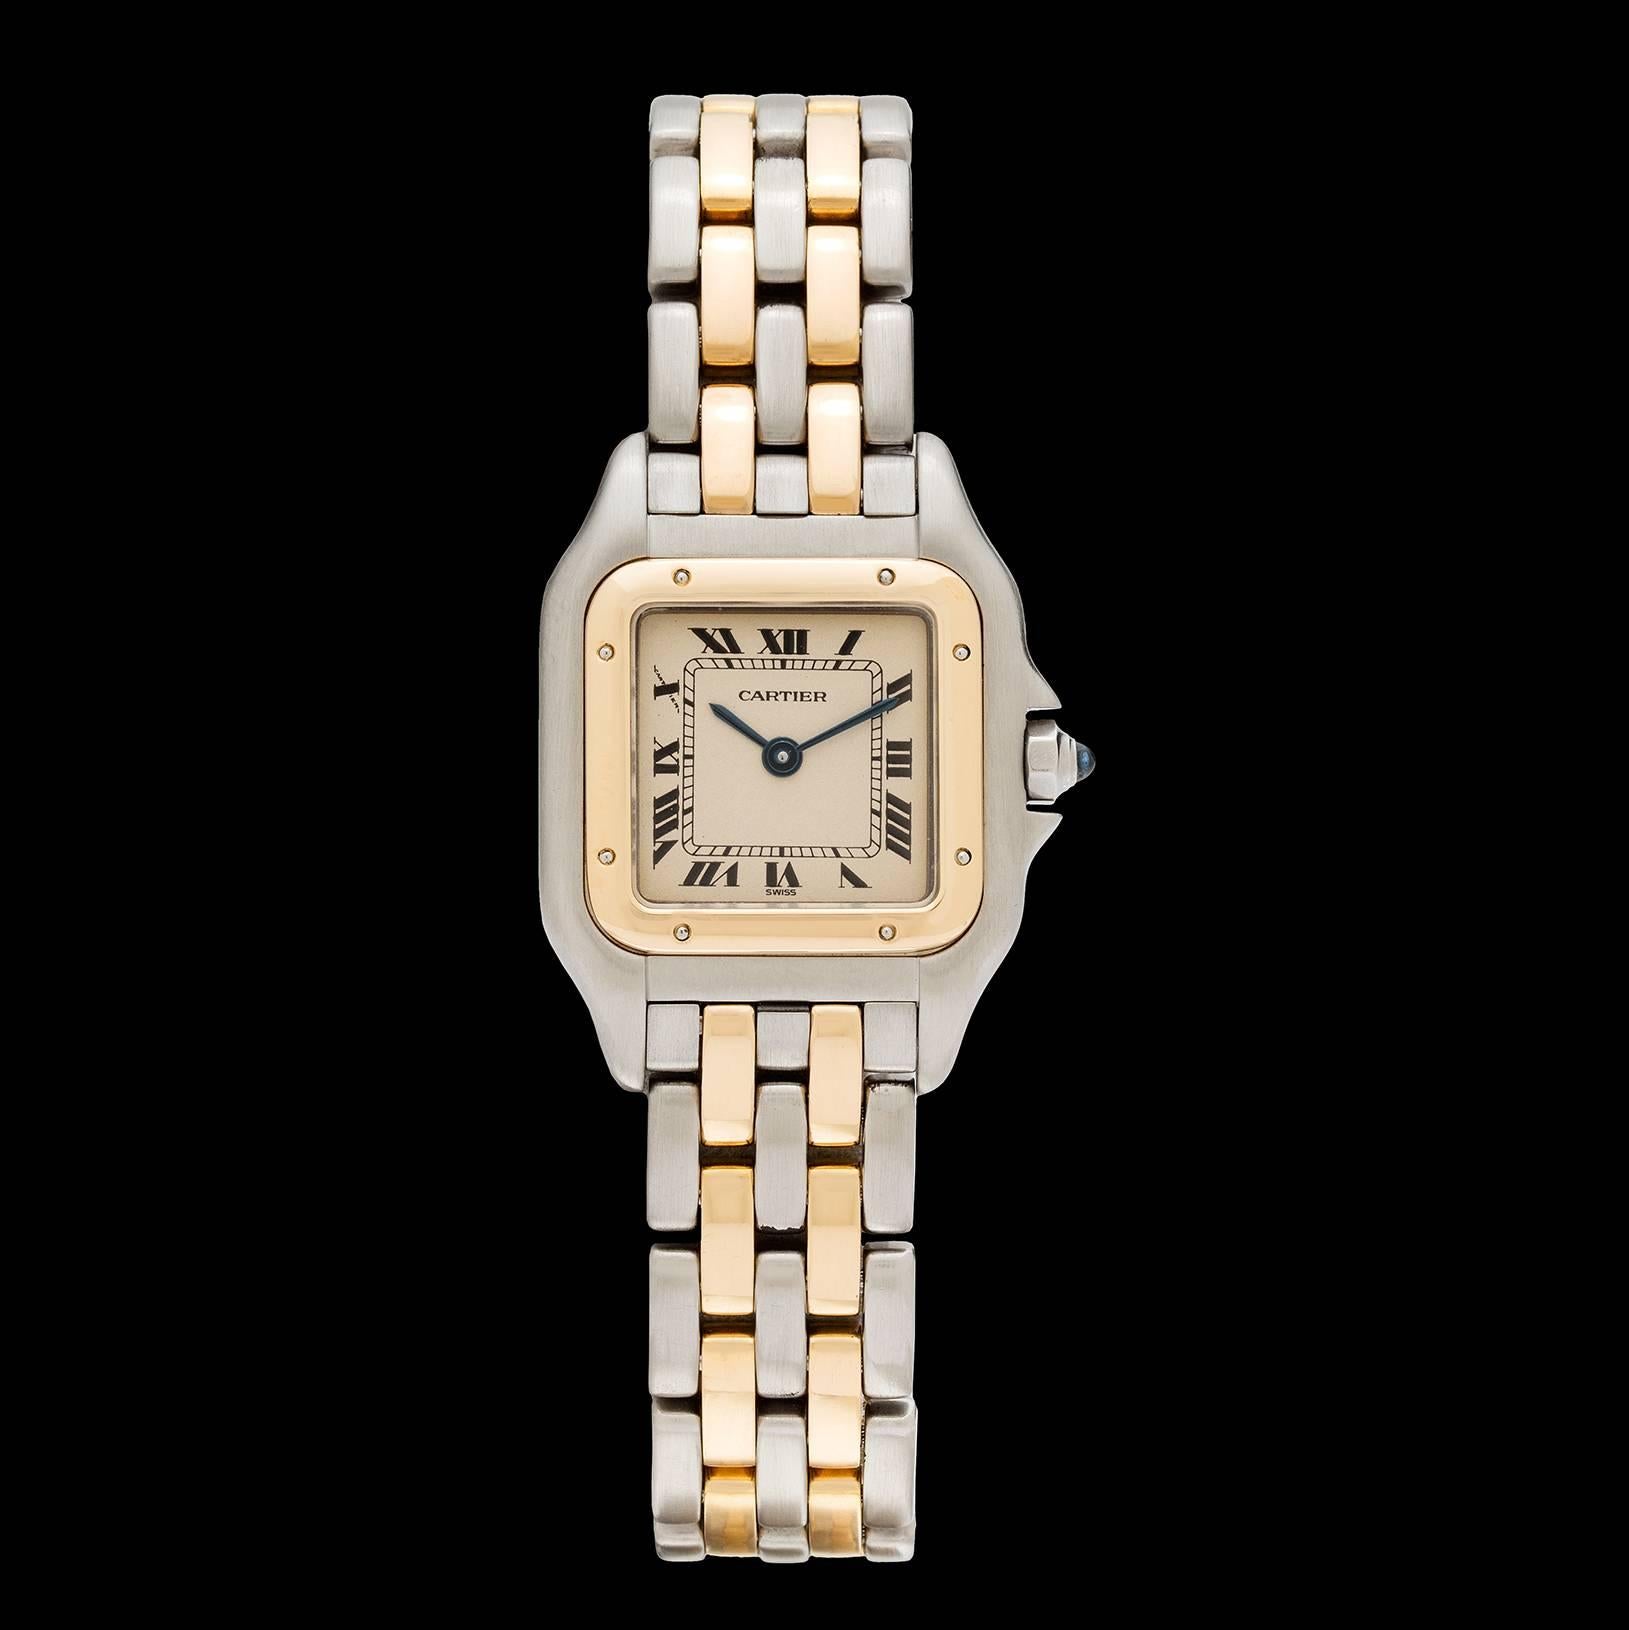 Cartier steel and 18k yellow gold Panthère watch, with quartz movement, 21mm case and hidden deployant clasp. The watch fits a 6 3/4 inch wrist. A classic design for all seasons.